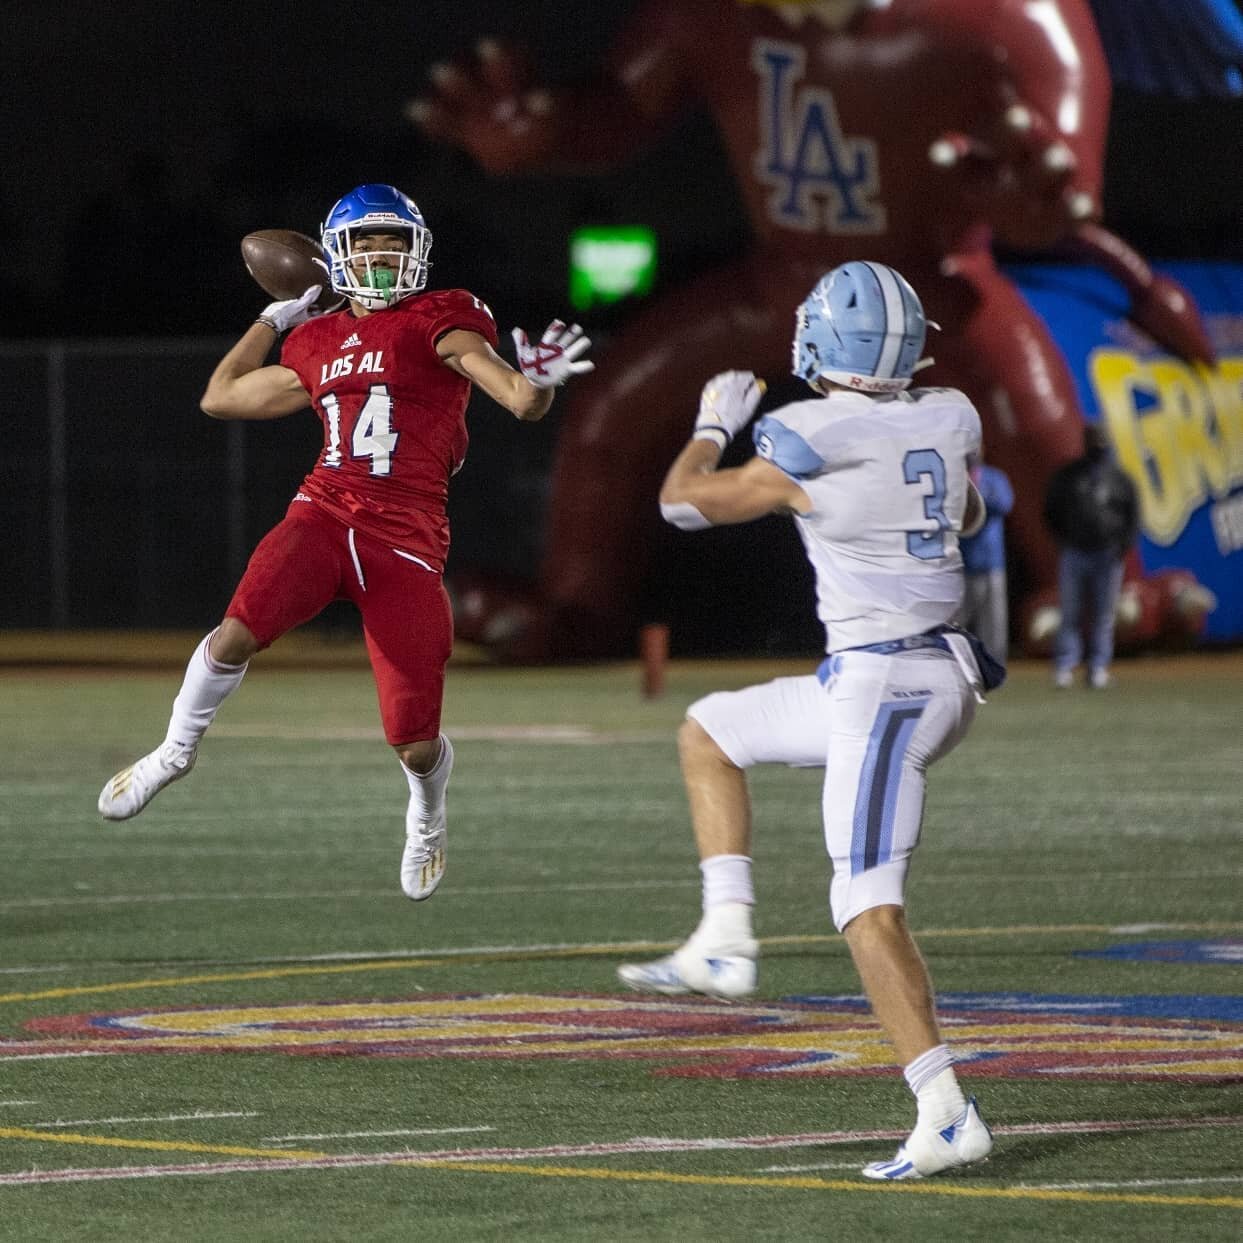 Losal vs. Corona Del Mar

Got some field time shooting a @losalgriffinfootball game last week. While Corona Del Mar led 21-17 at halftime, the Griffins offence rallied for a 35 point third quarter, after the defence intercepted a pass for a touchdown